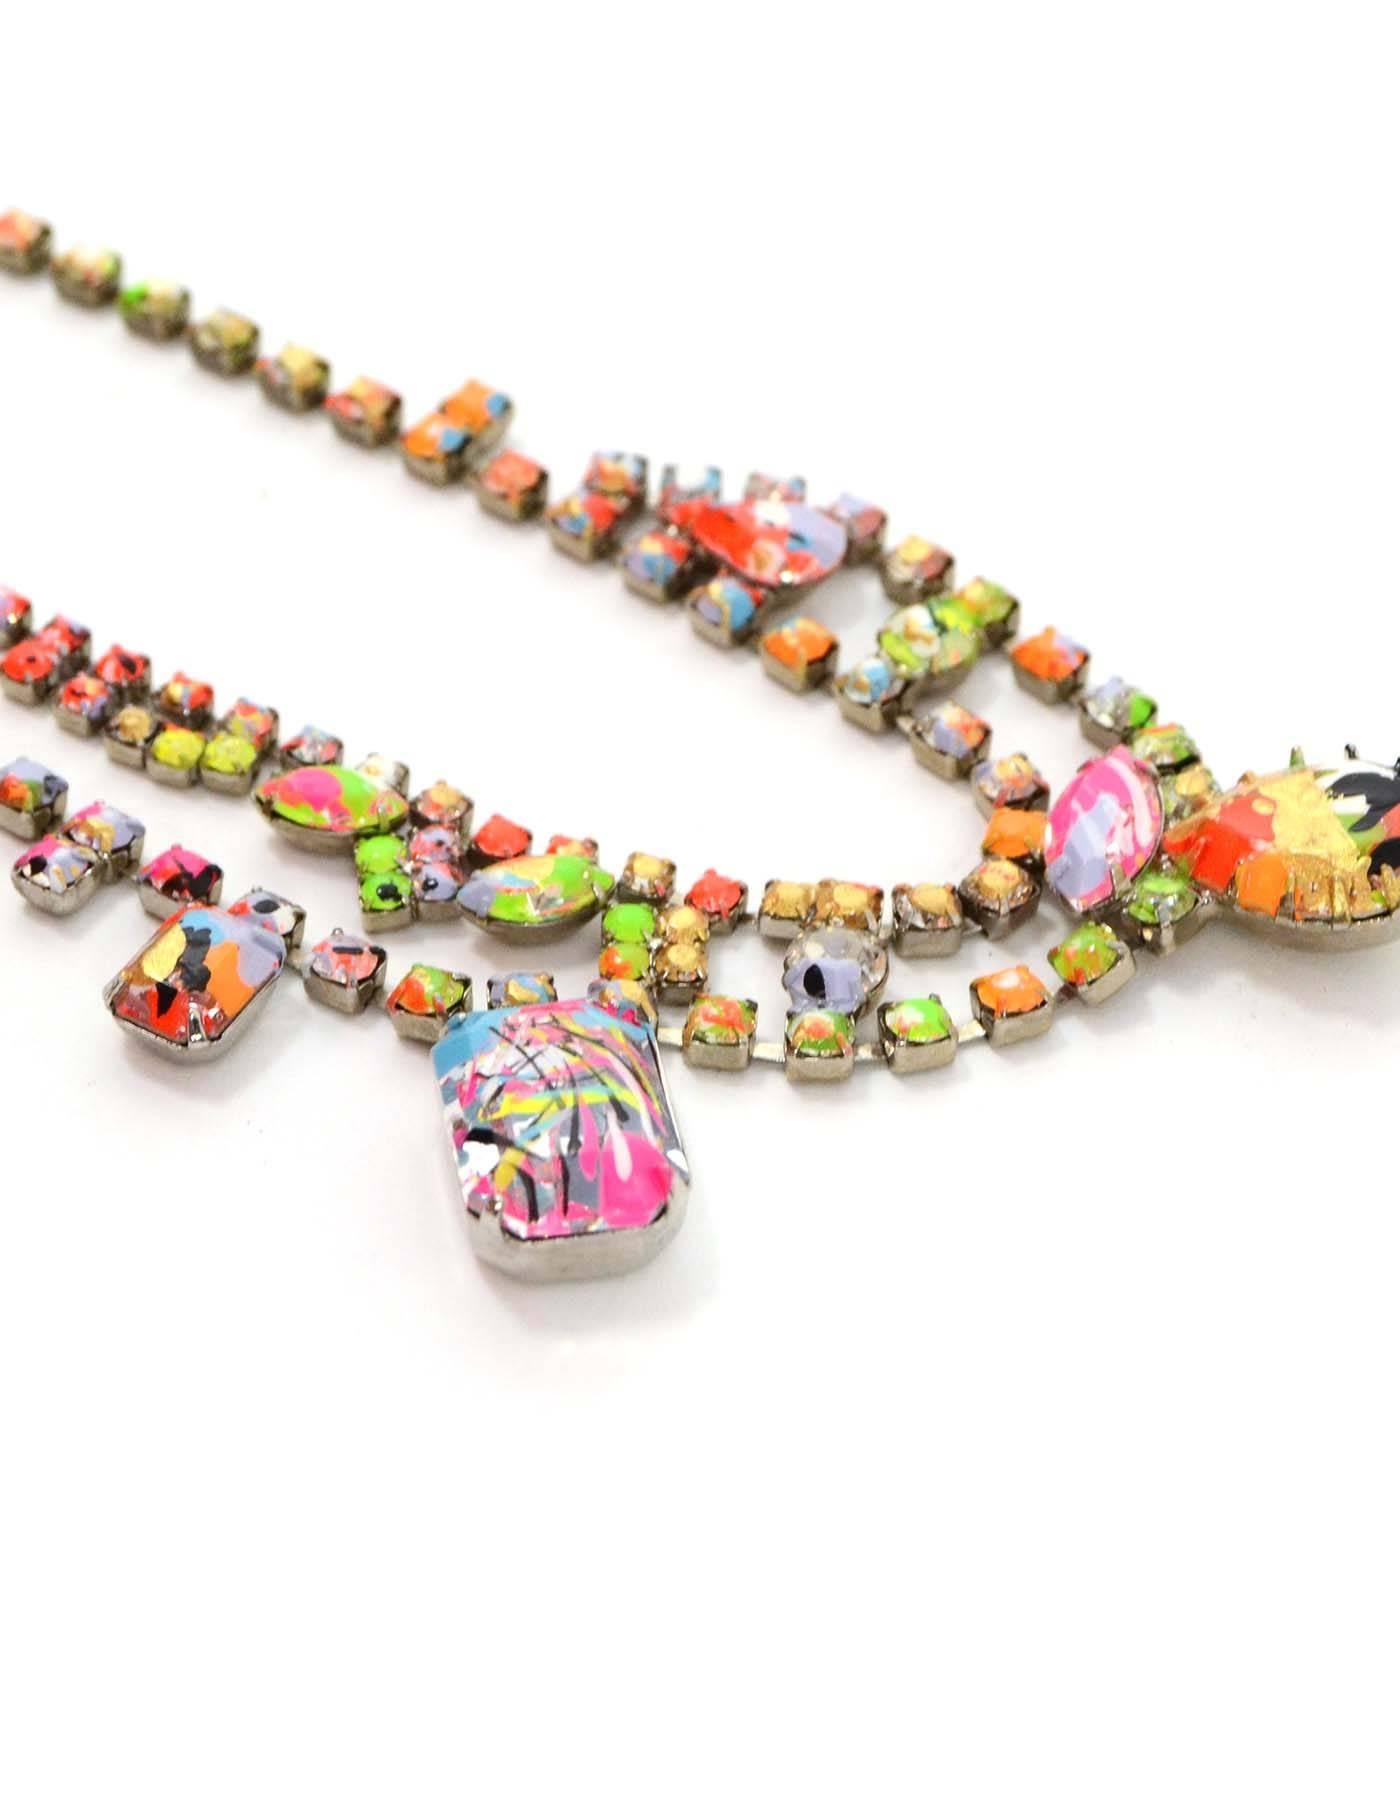 Tom Binns Multi-Color Asymmetrical Bib Necklace 
Features hand-painted paint splatters throughout necklace
Made In: U.S.A
Color: Multi-colored
Materials: Metal and crystal
Closure: Push lever clasp
Stamp: Tom Binns Made in USA
Overall